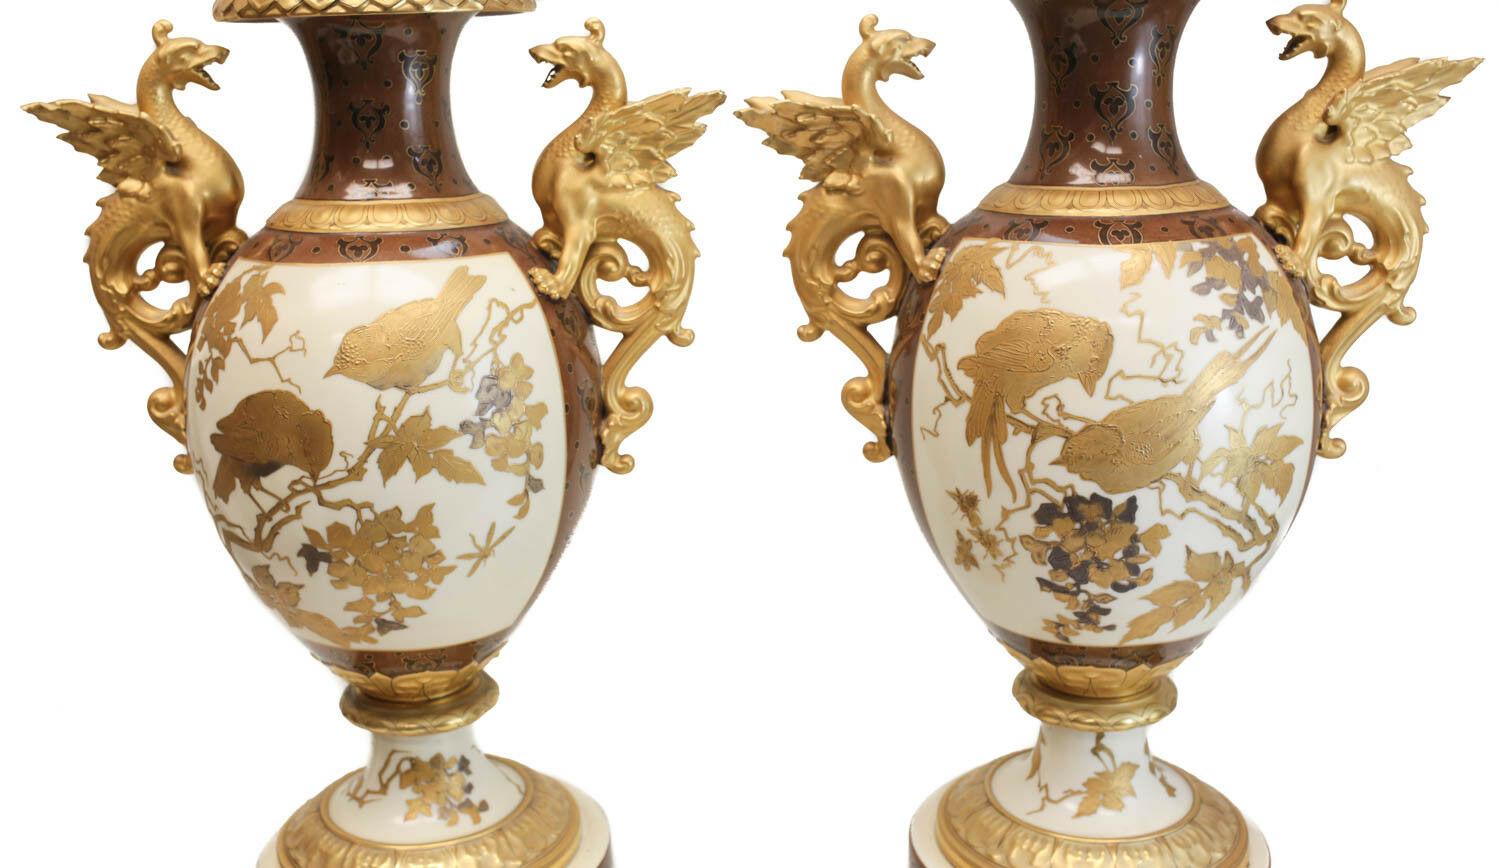 Pair of Pirkenhammer porcelain Aesthetic gold encrusted double handled footed vase, circa 1880. The central image of the urns depict gold encrusted birds perched on tree branches with more tree branches to the verso. Gold encrusted floral designs